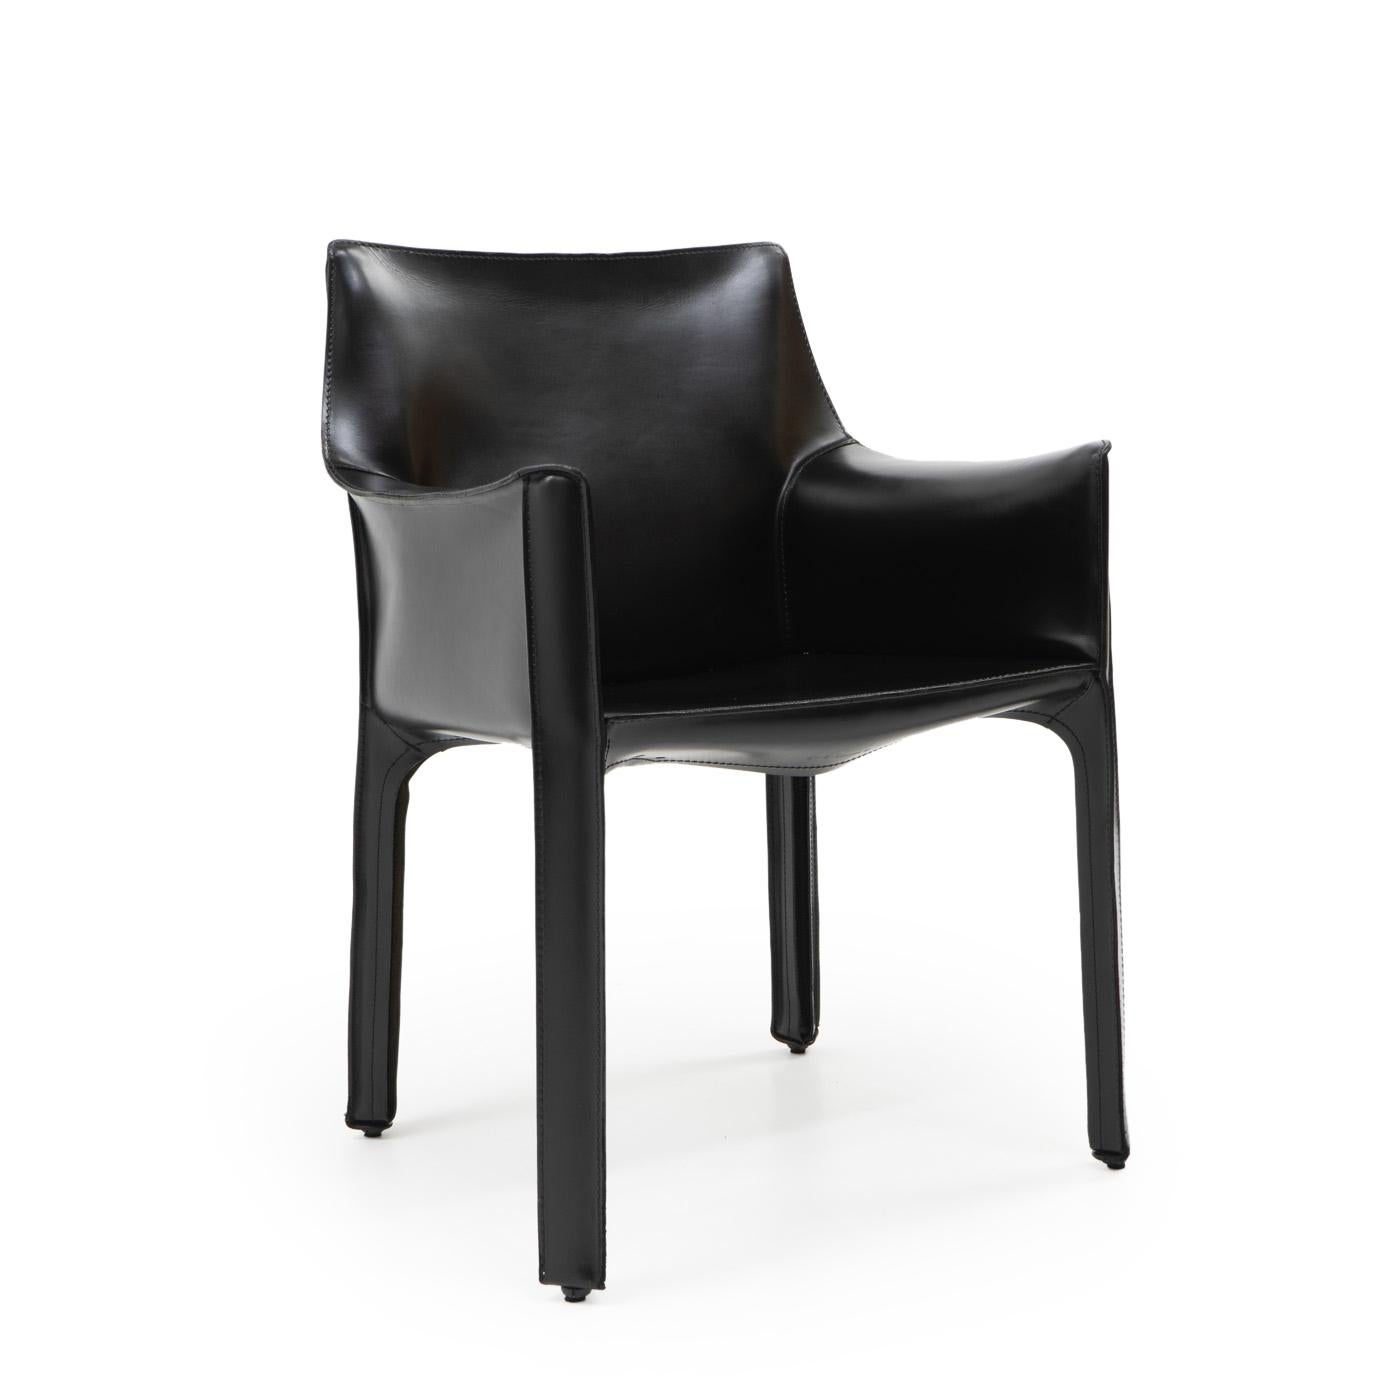 Cab 413 arm chair in black leather by Mario Bellini for Cassina:

The Cab chair is built up as a tubular frame over which thick saddle leather is fitted; the leather skin is kept in place with zippers on the inside legs.

A wonderful piece of